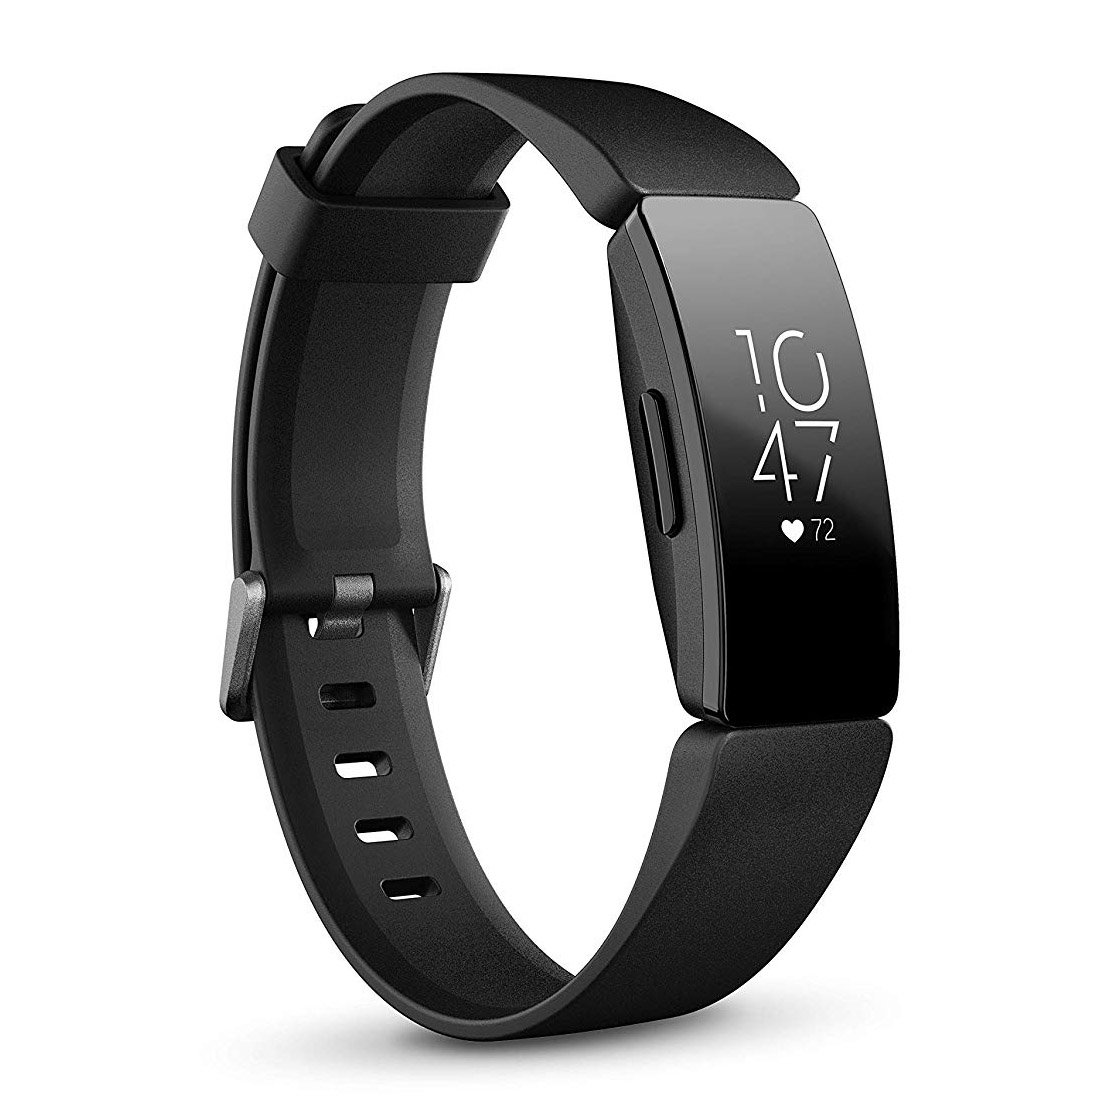 8 Best Fitness Trackers for Women 2020 By Experts